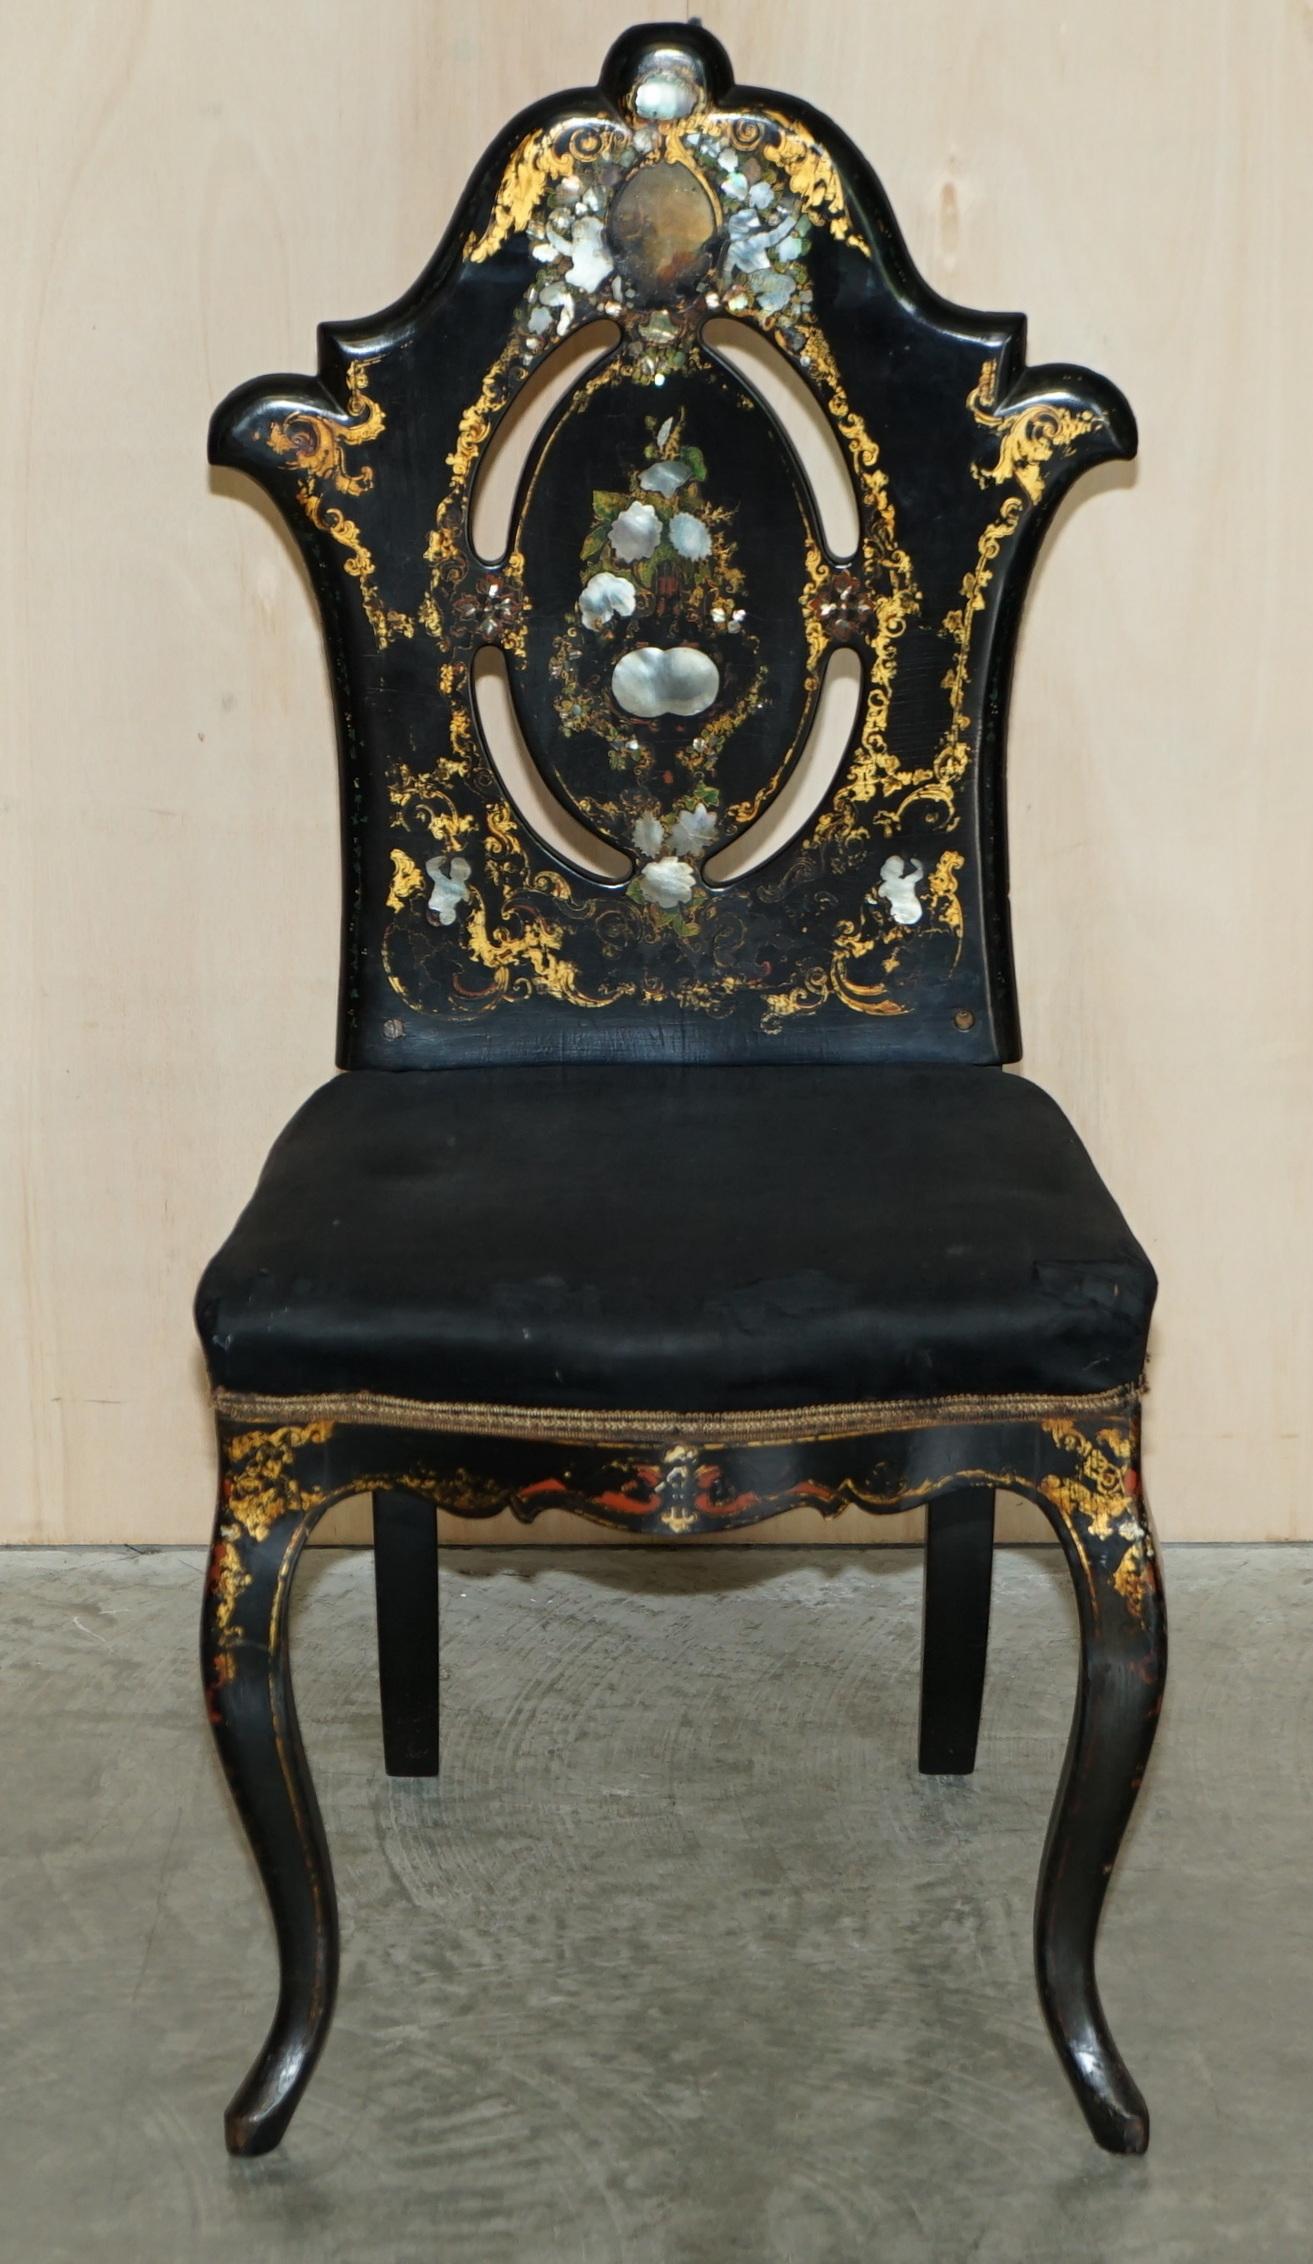 We are delighted to offer for sale this suite of four, exquisite, original circa 1815 Regency, Mother of Pearl inlaid, black lacquered hall side chairs

A very good looking well made and decorative suite, in truth, I have never seen a set of four